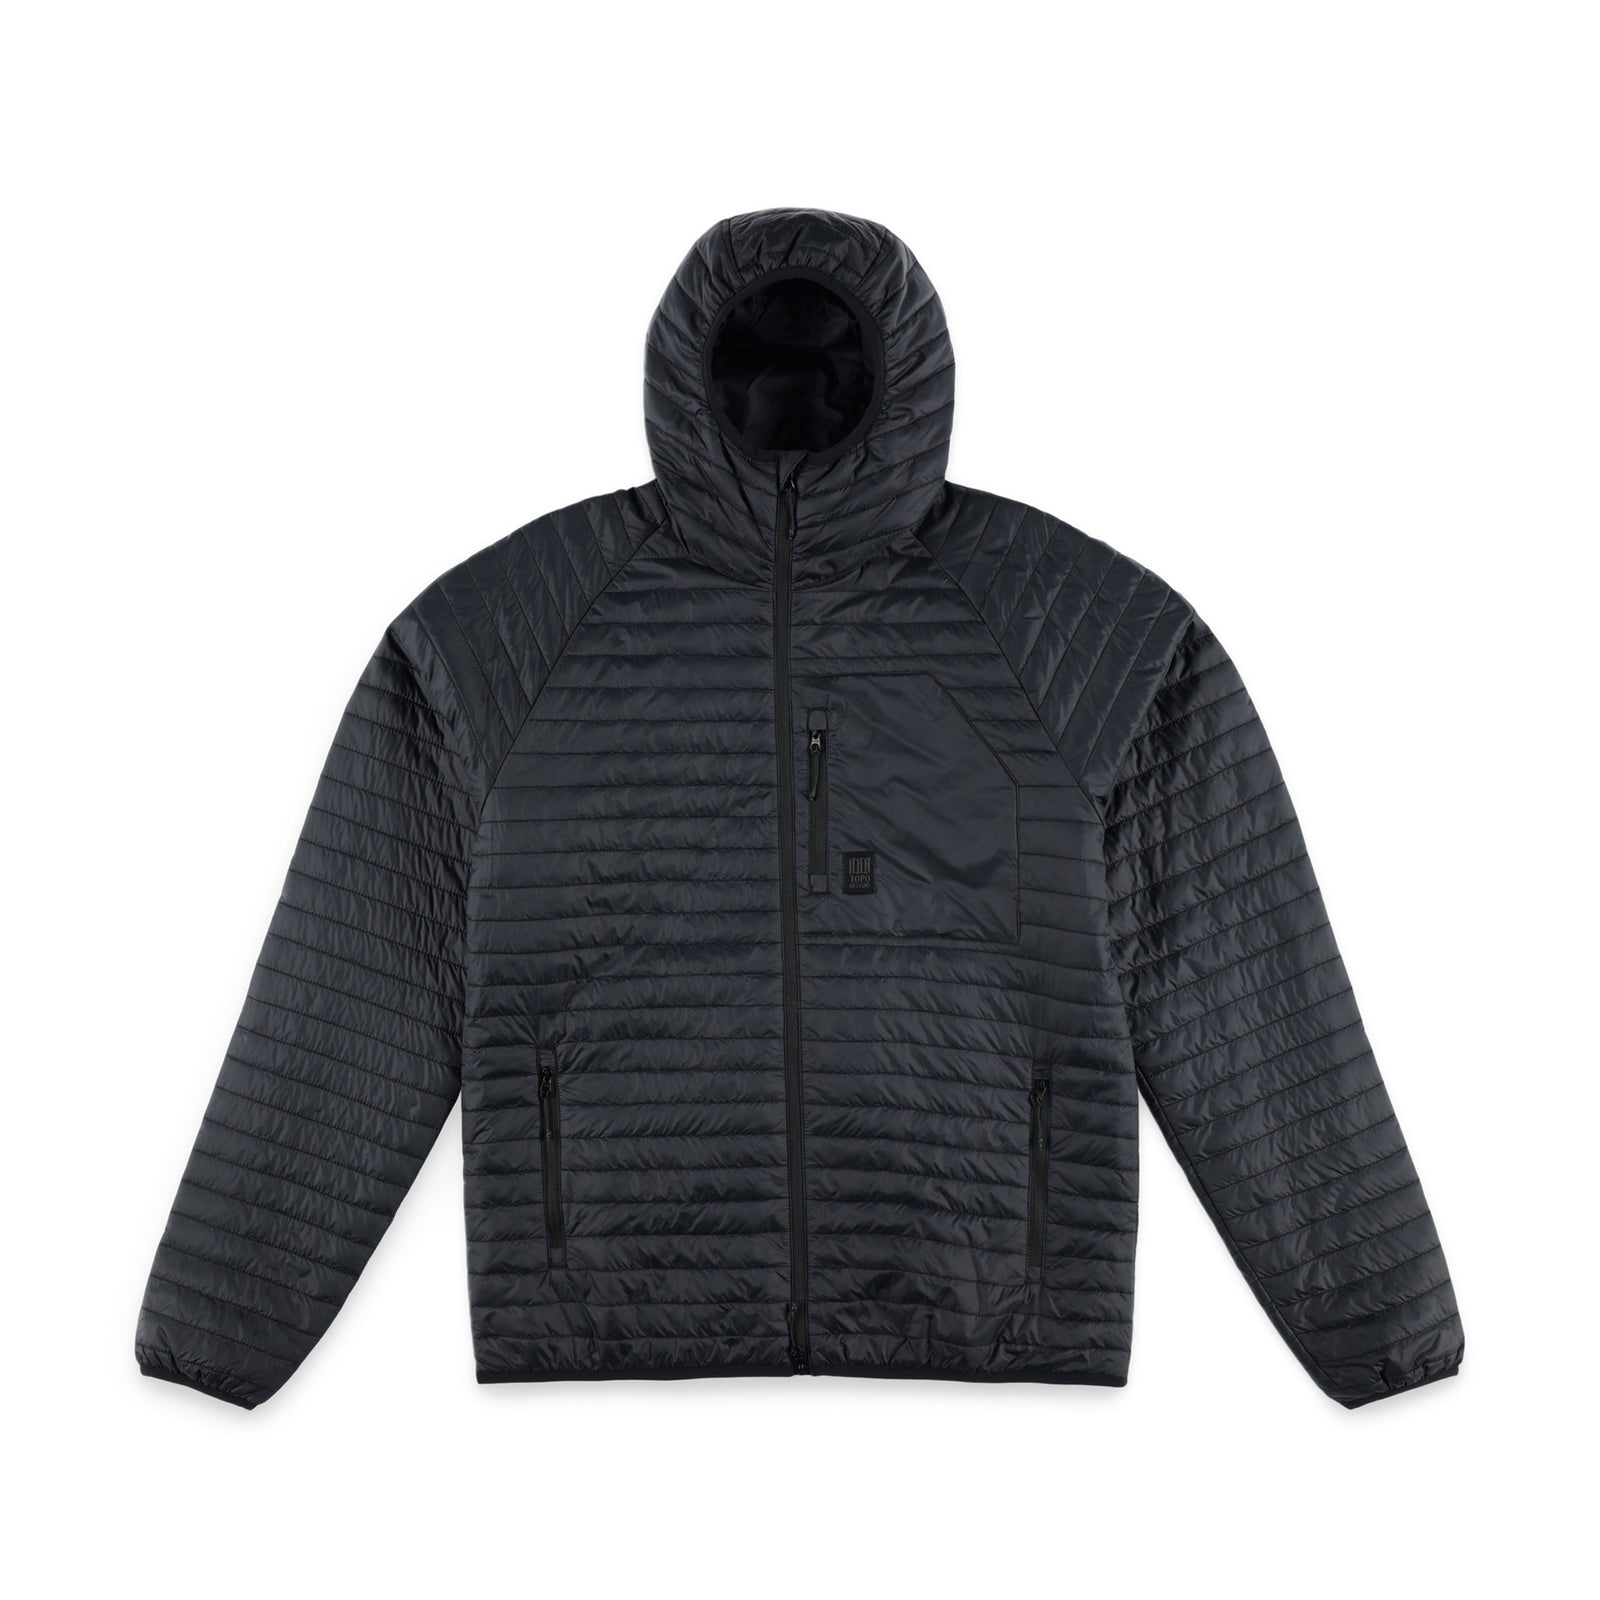 Topo Designs Men's Global Puffer packable recycled insulated Hoodie jacket in "black"